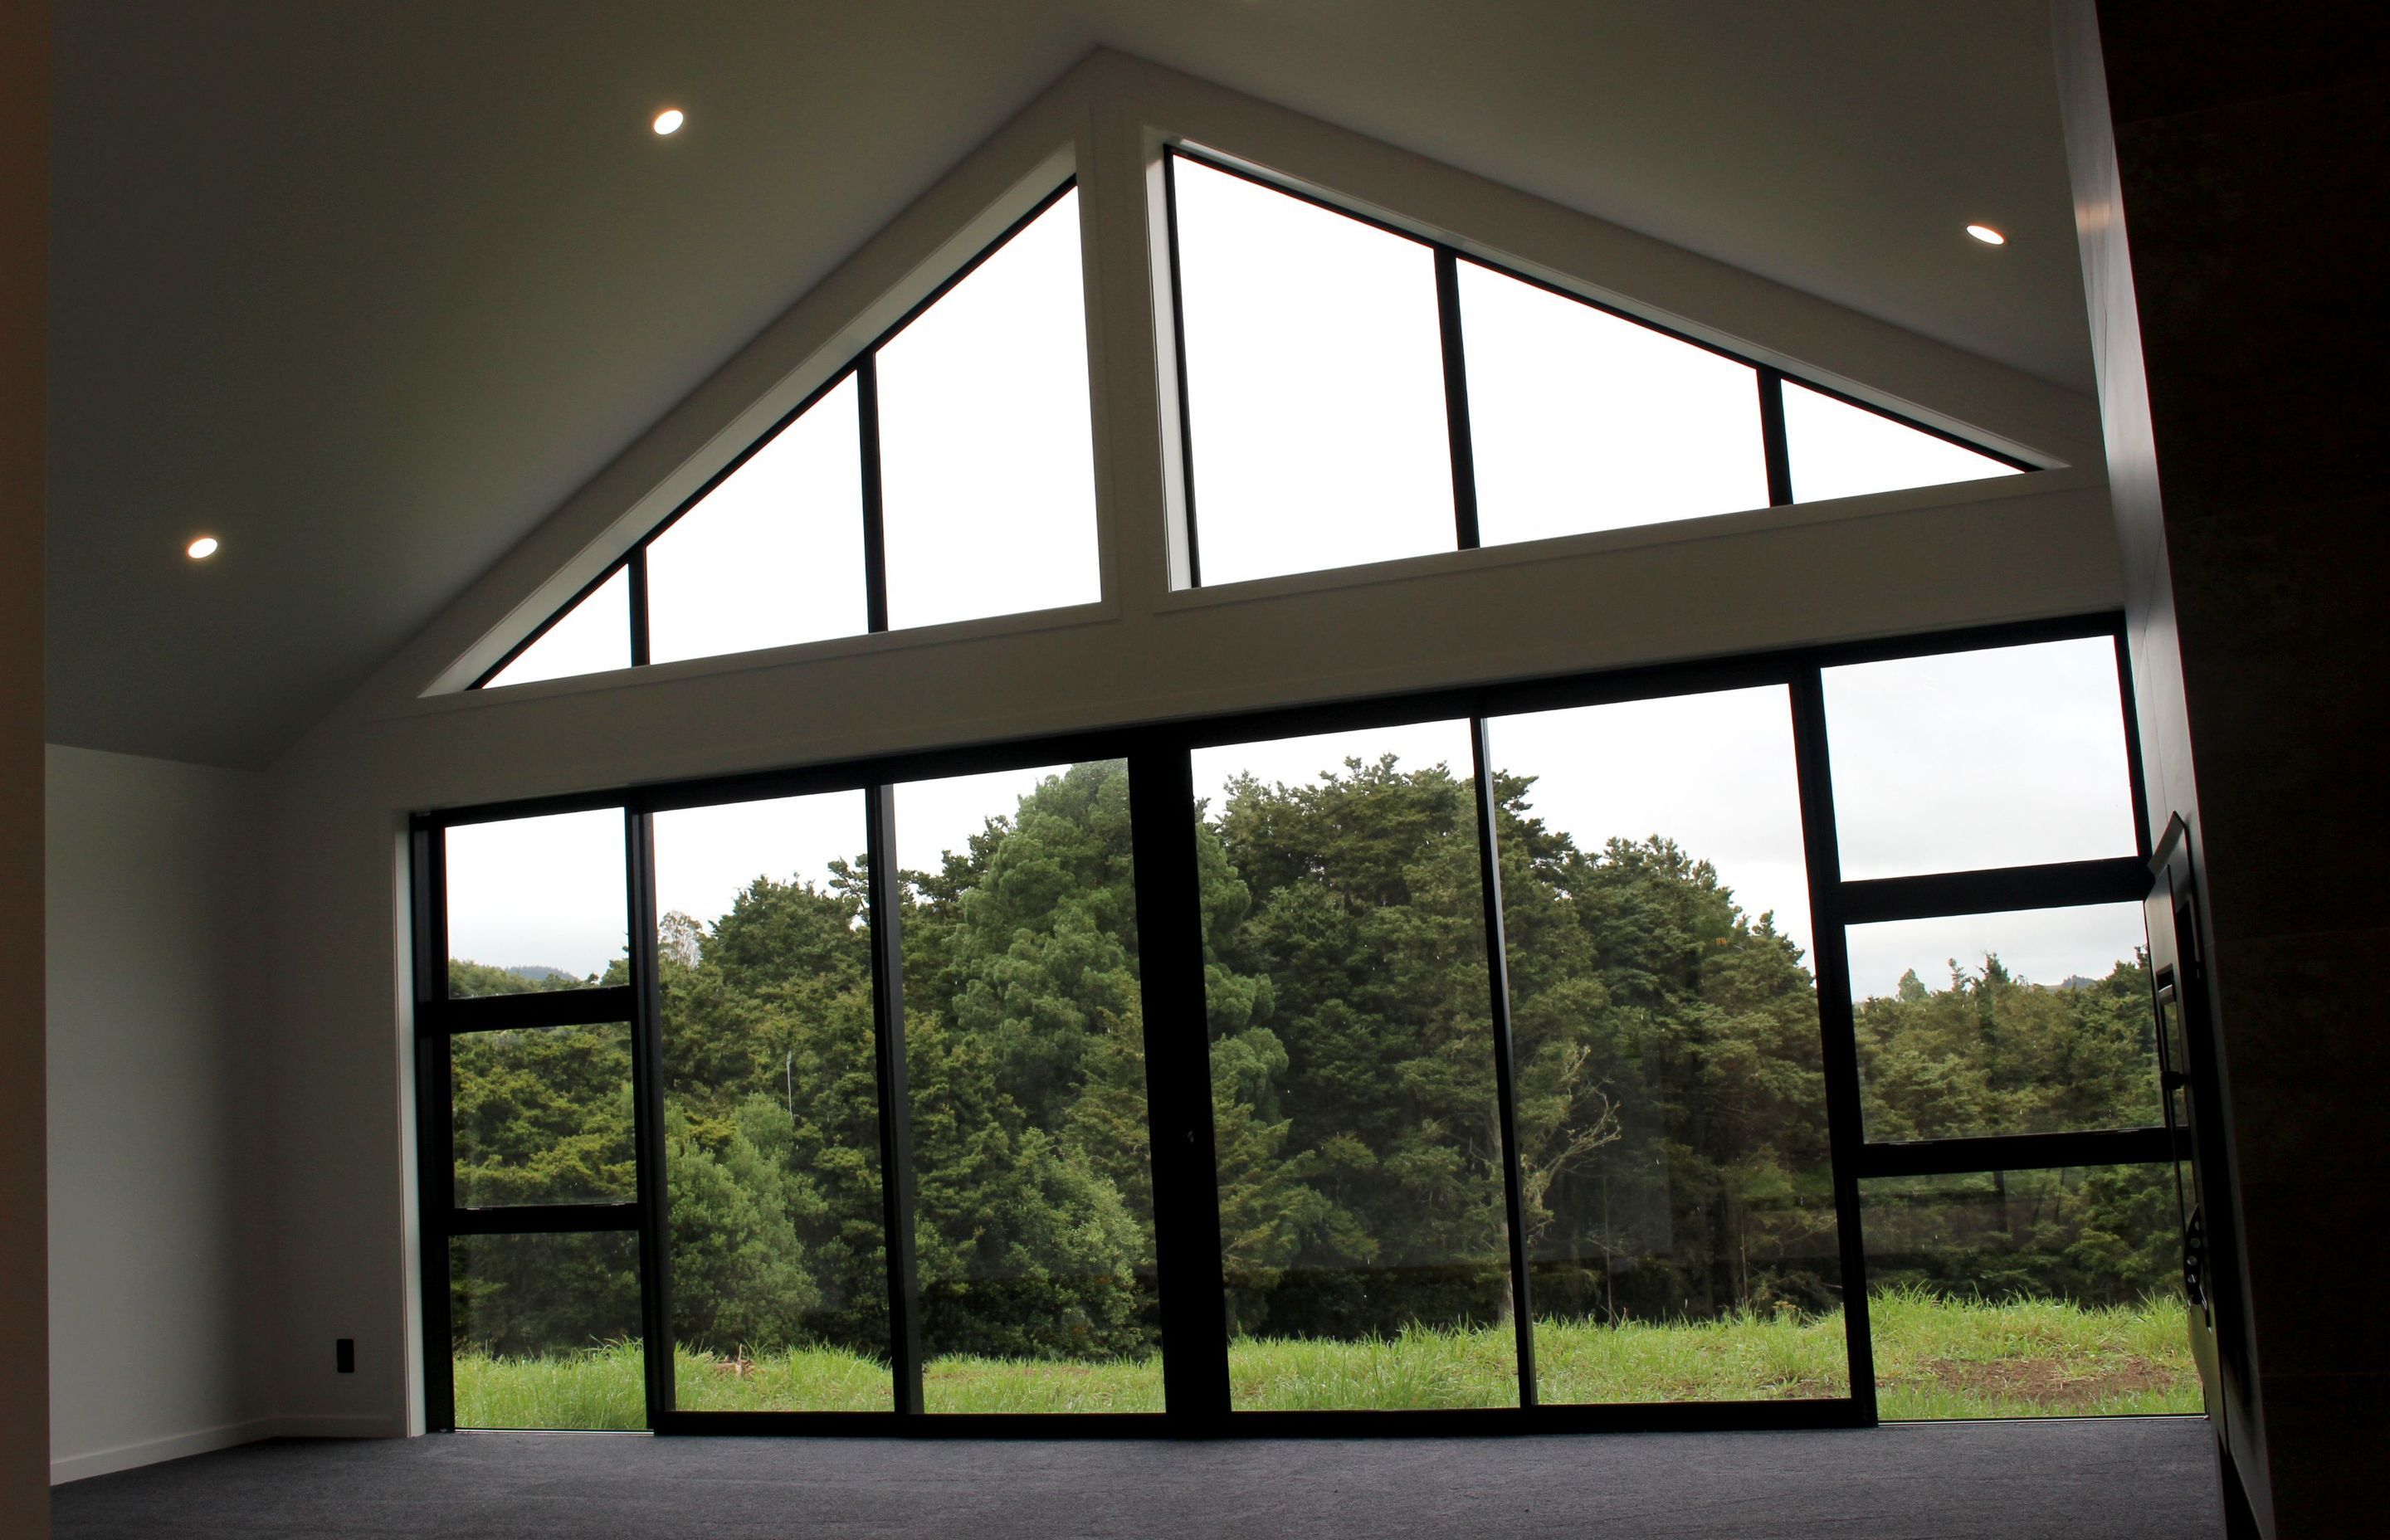 The main living space has glass sliders and glazing (from Elite Window &amp; Doors Whangarei) floor to ceiling to maximise the rural views and let the sun flood into the space.